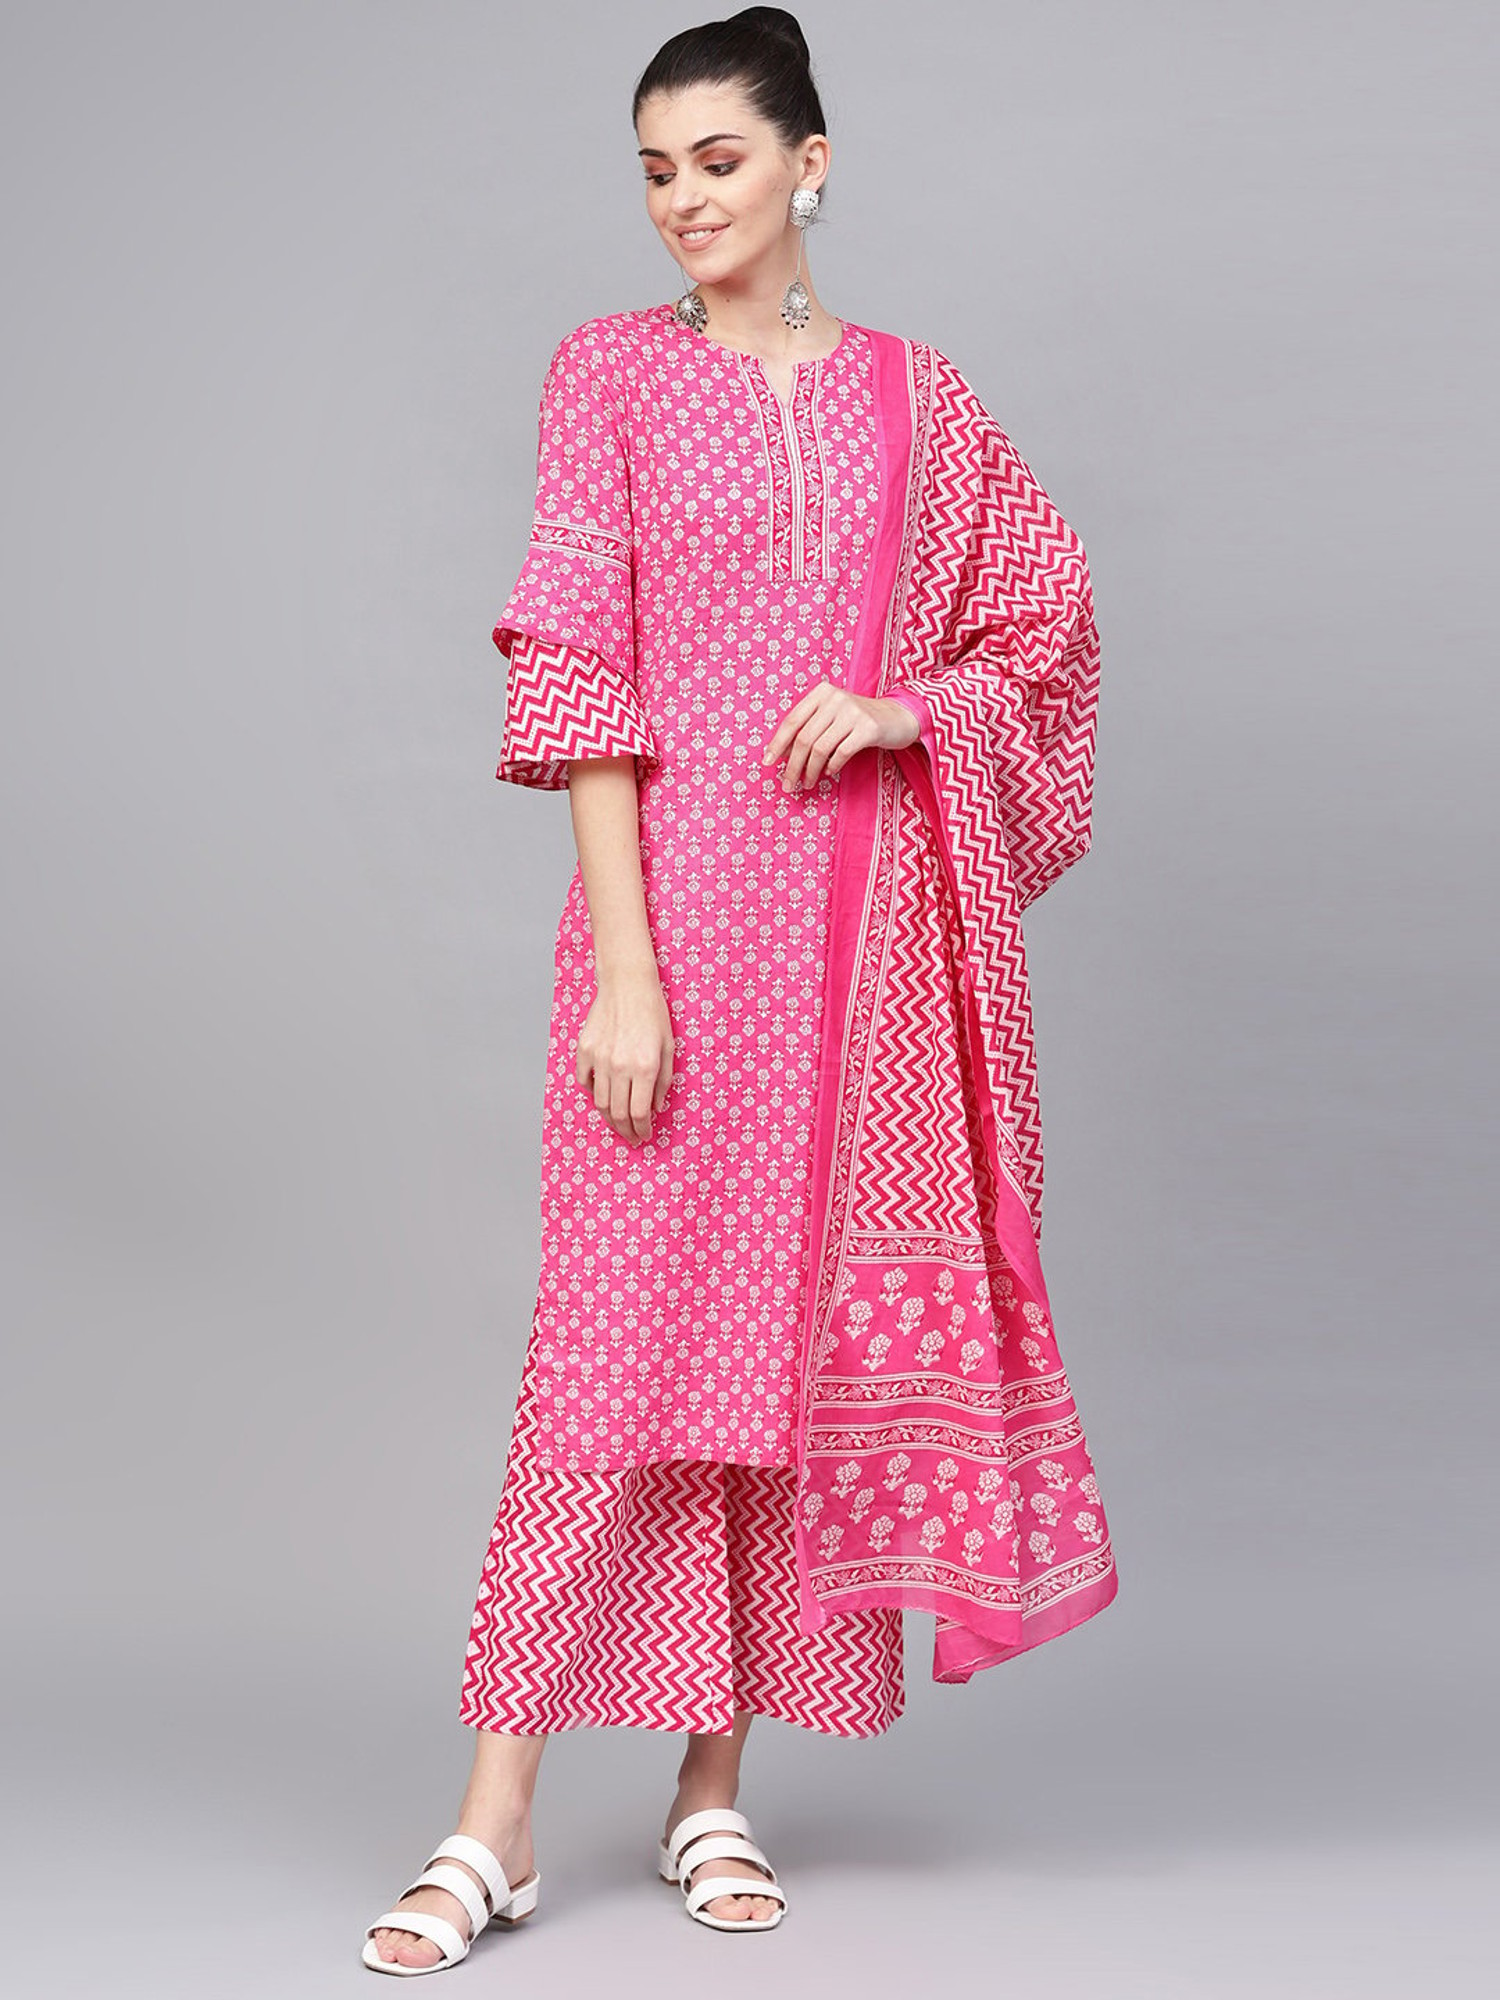 Charming Pink Colored Party Wear Embroidered Khadi Cotton KurtiPalazzo Set